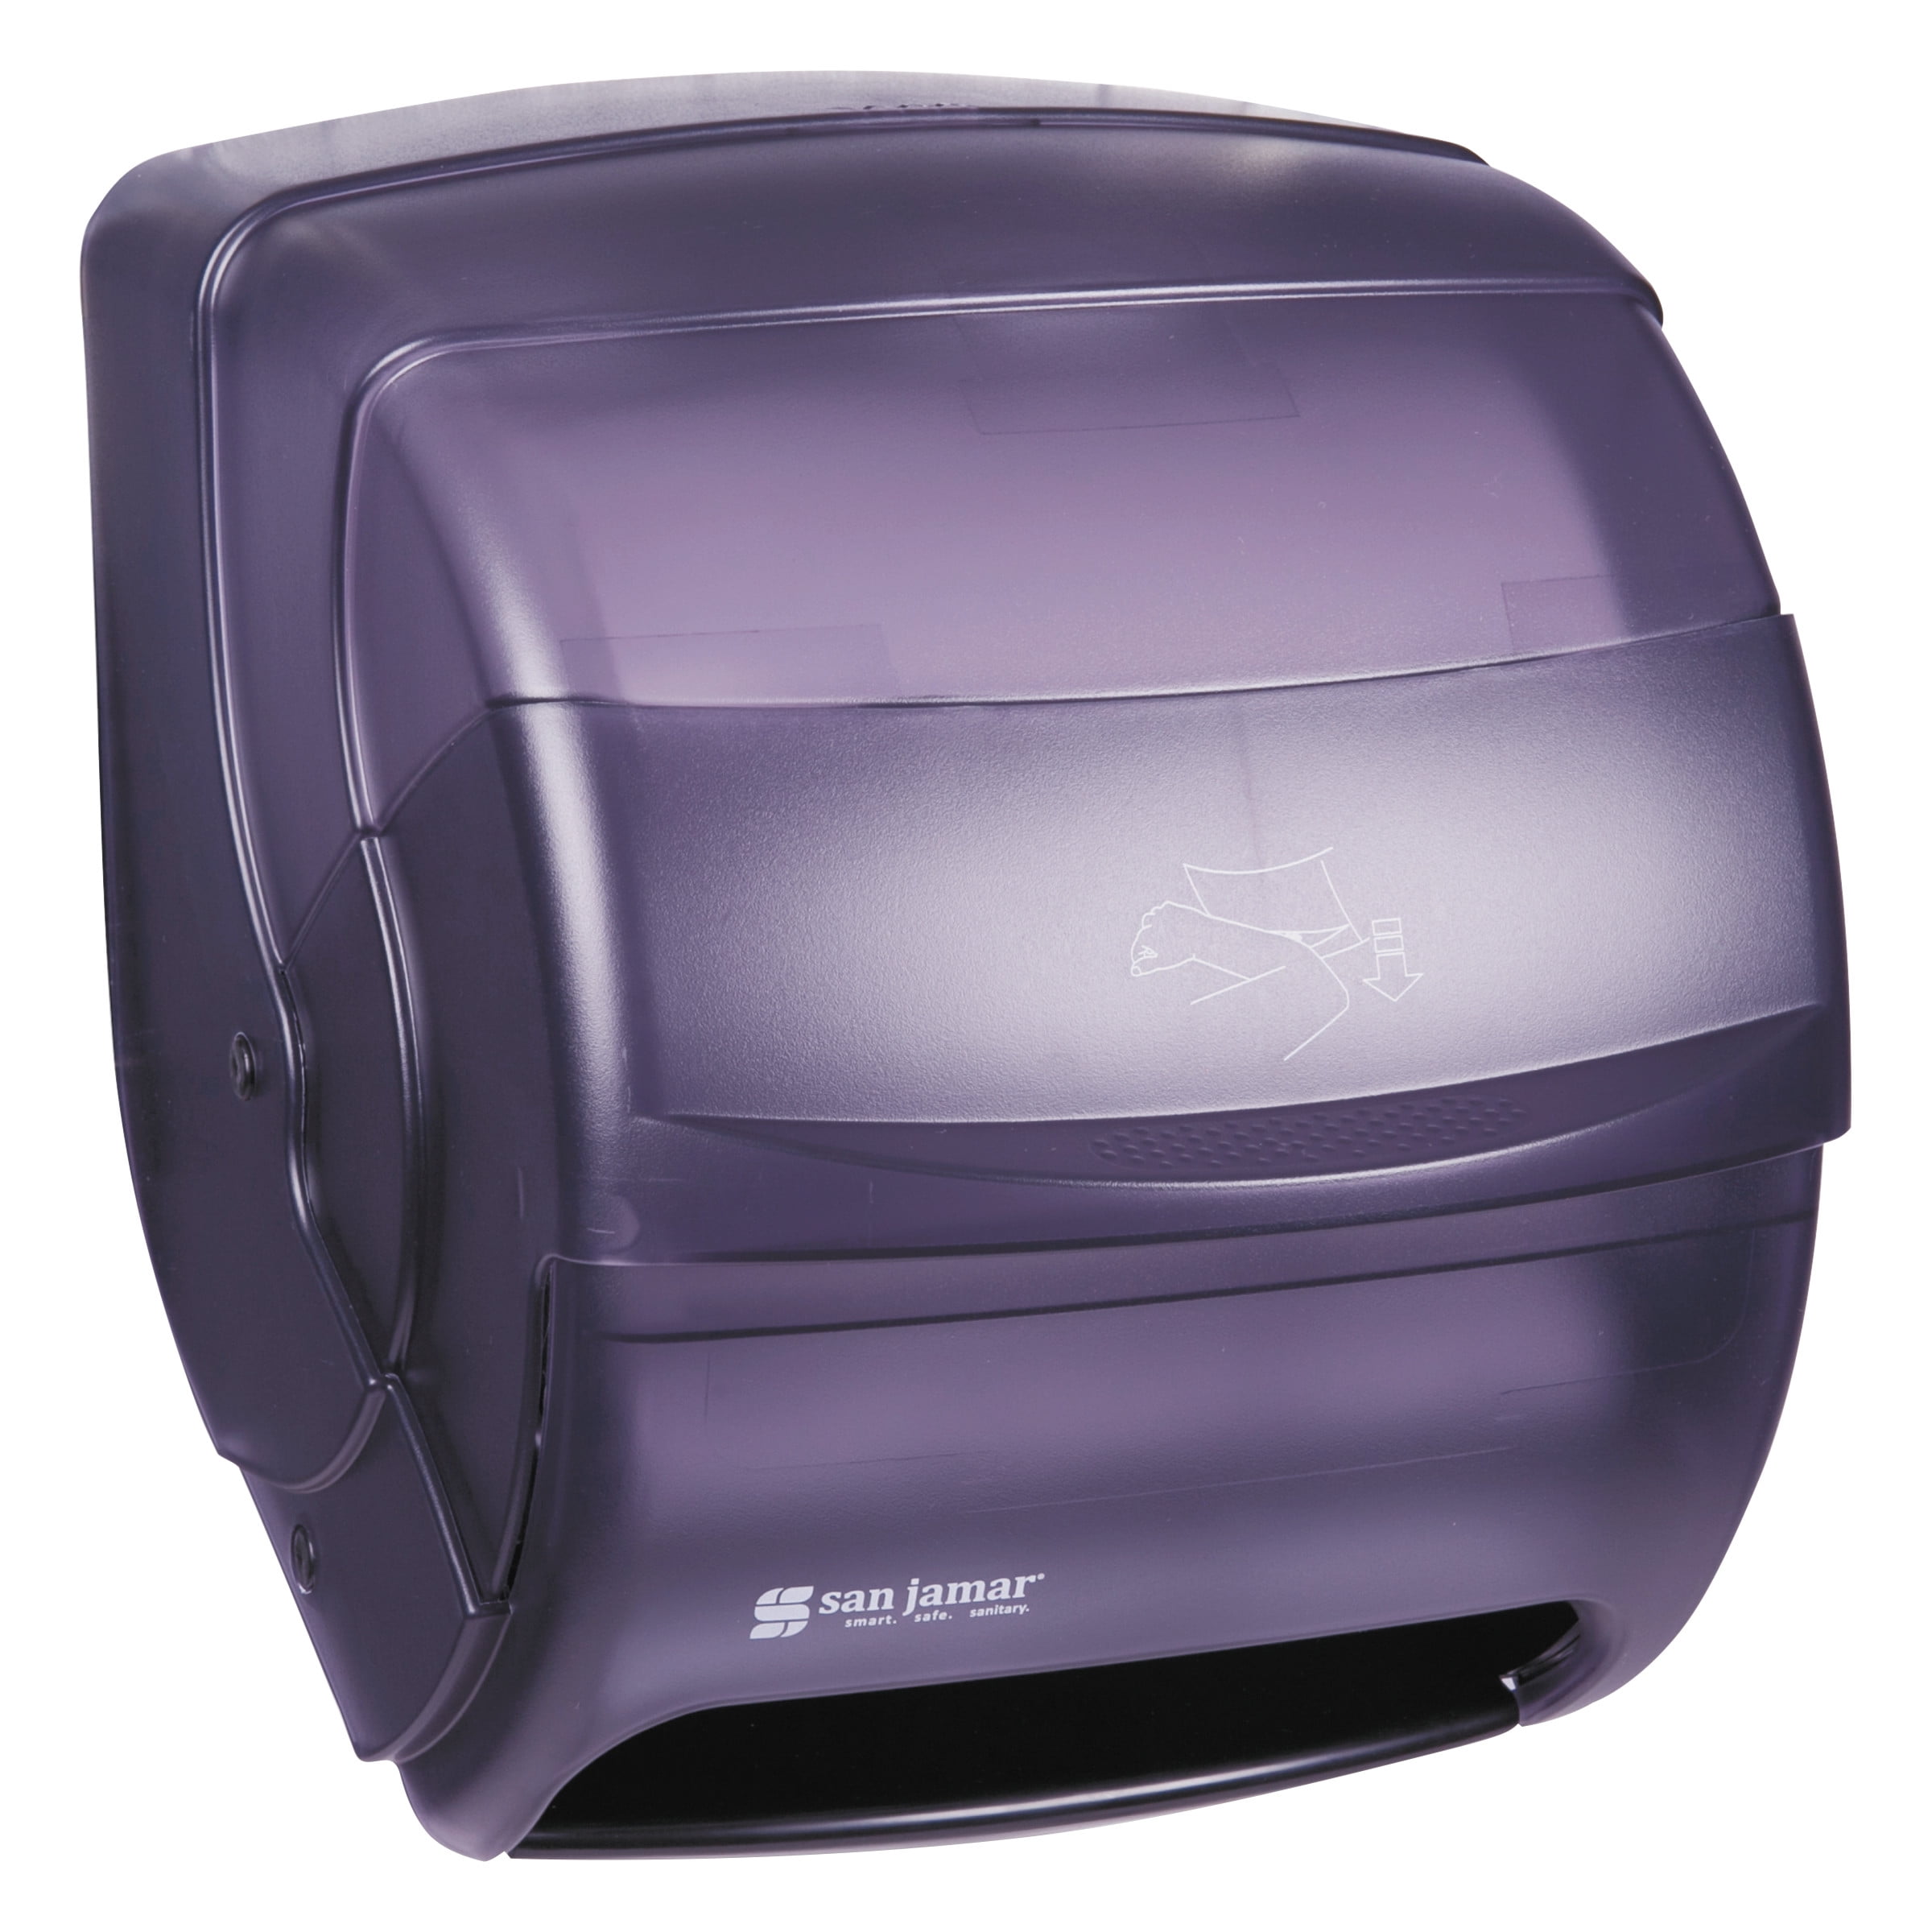 San Jamar T451XC Perforated Roll Towel Dispenser for 11 Inch Roll 13 1/4w x 4 5 